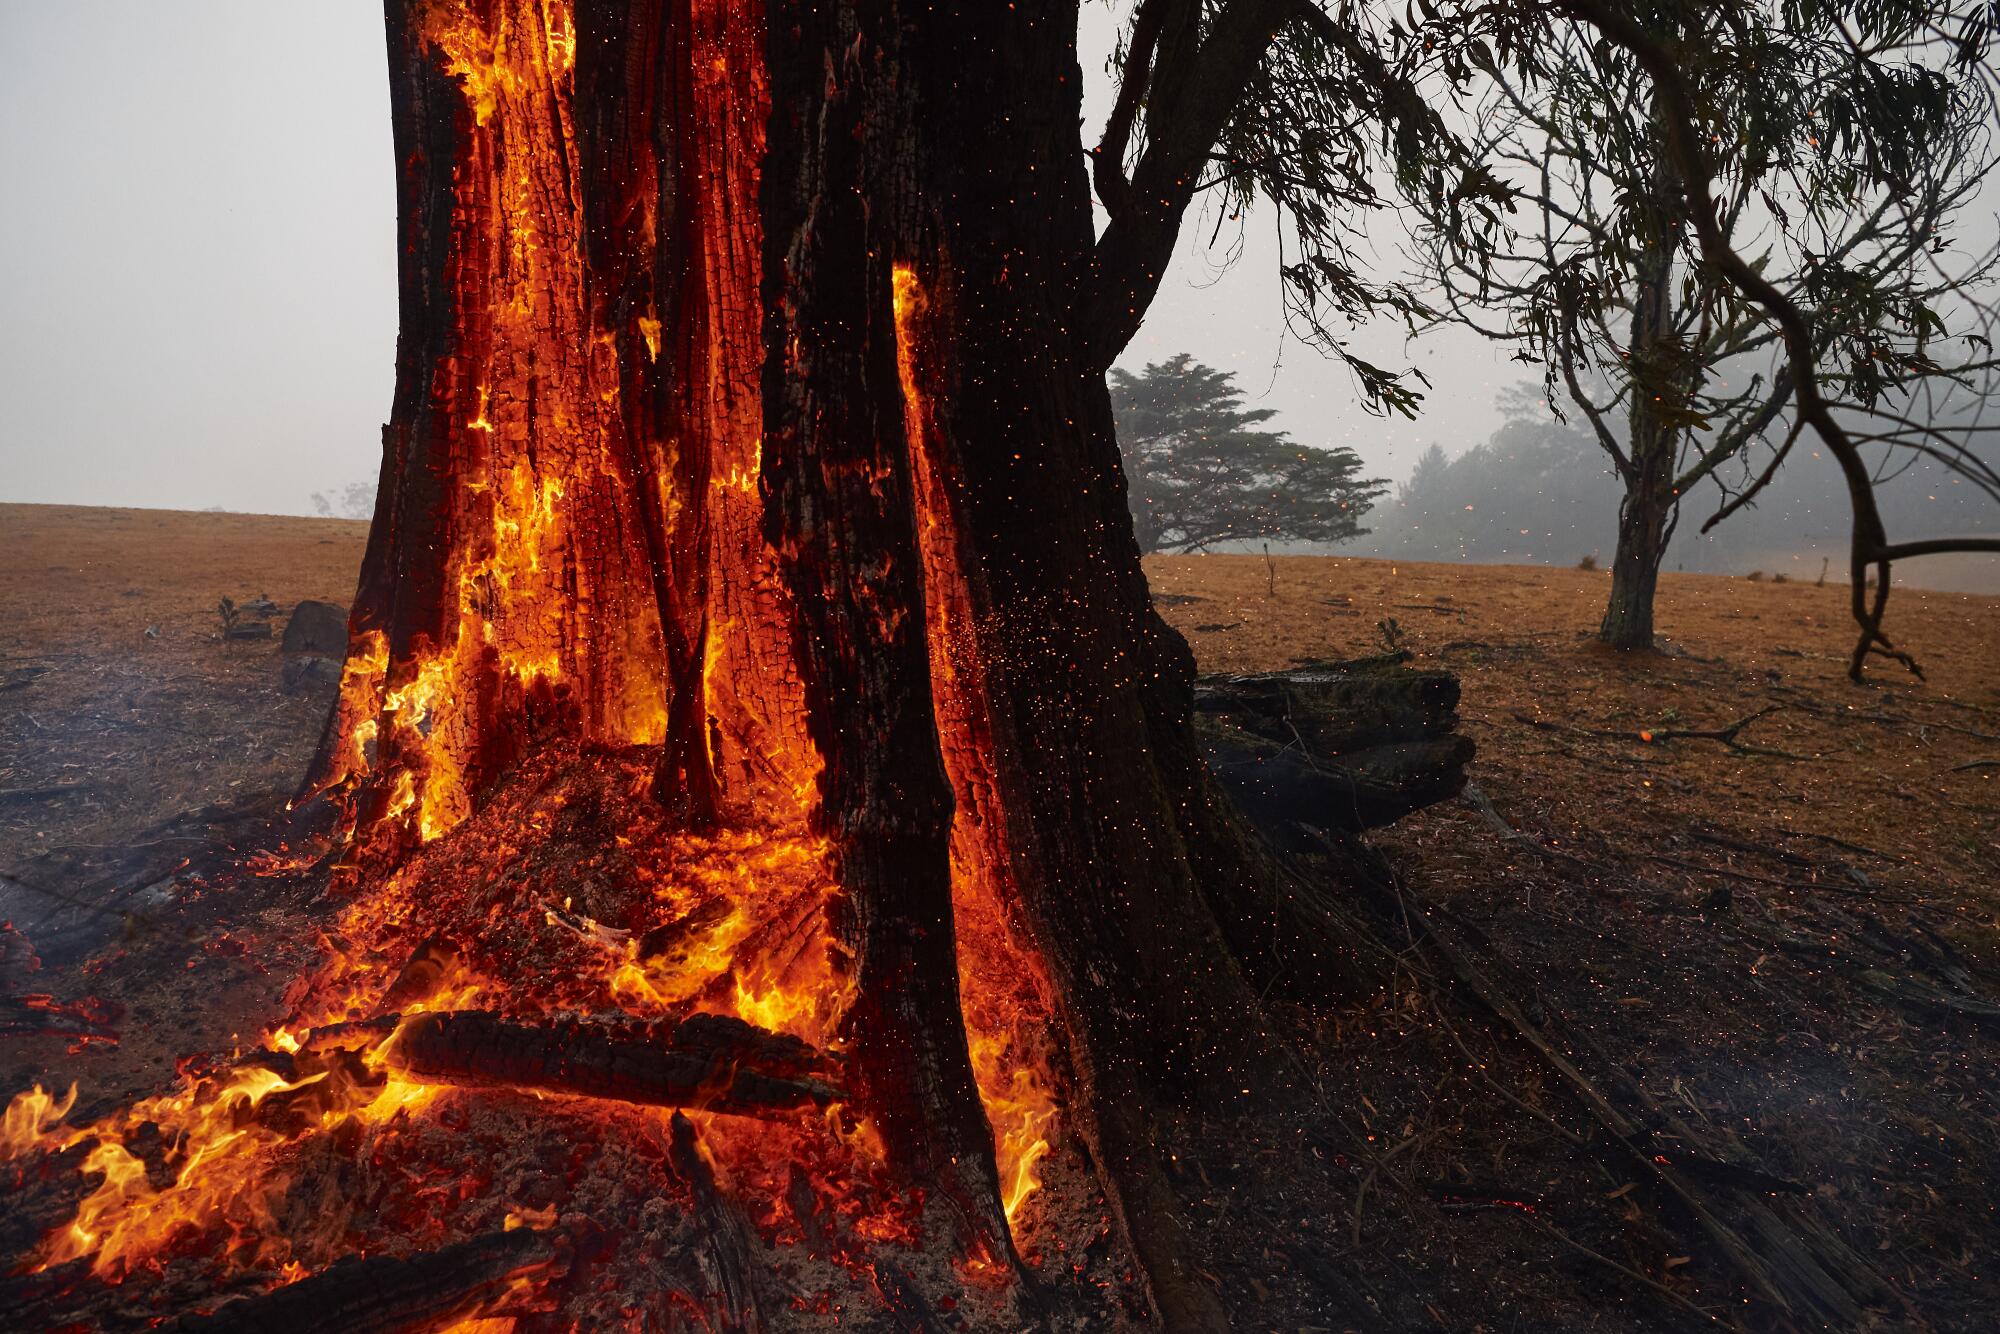 A tree burns from the inside hours after the passage of a fire front in Bundanoon, Australia. 